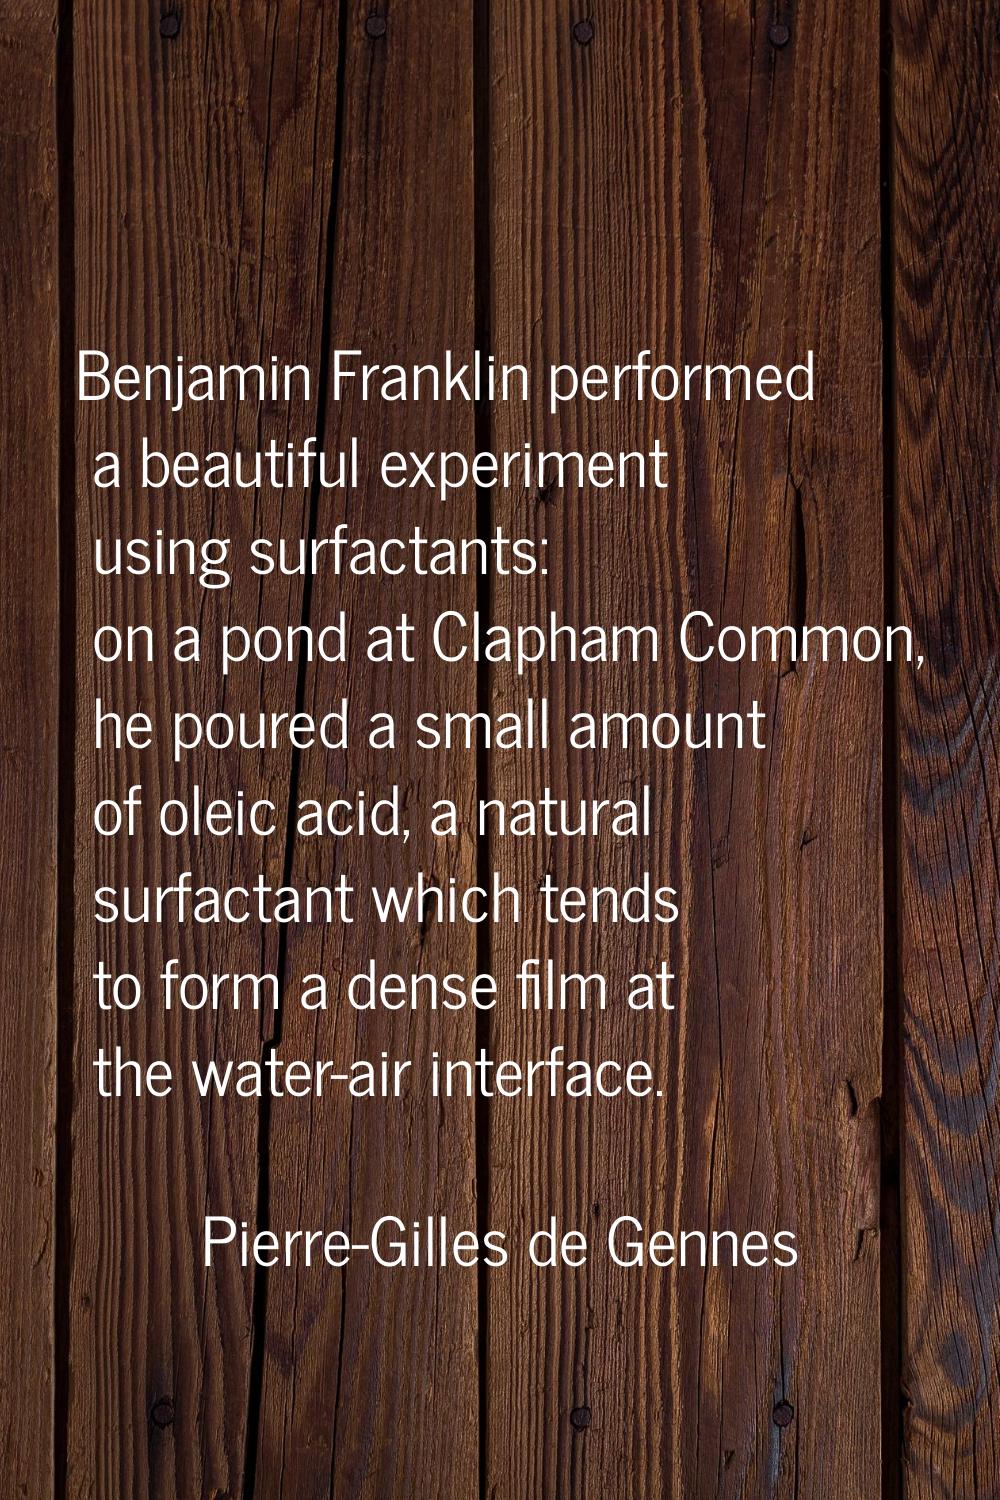 Benjamin Franklin performed a beautiful experiment using surfactants: on a pond at Clapham Common, 